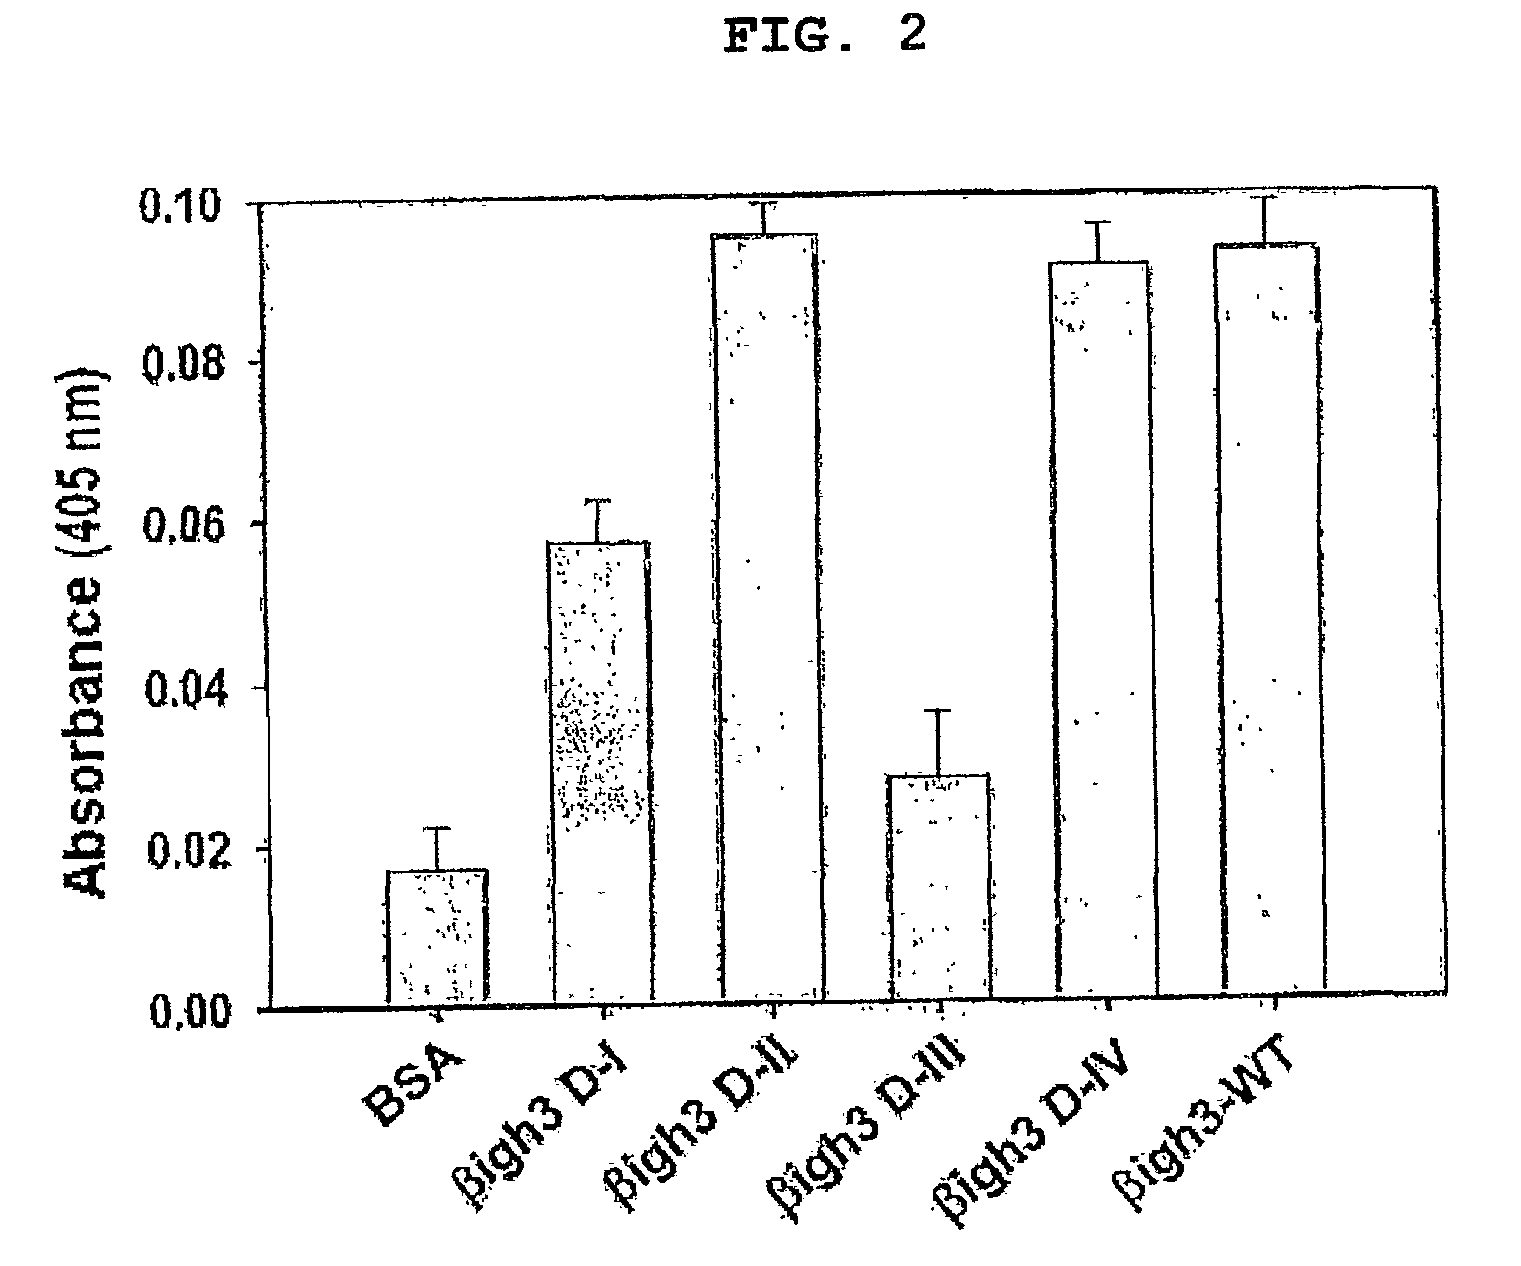 Peptides and derivatives thereof showing cell attachment, spreading and detachment activity